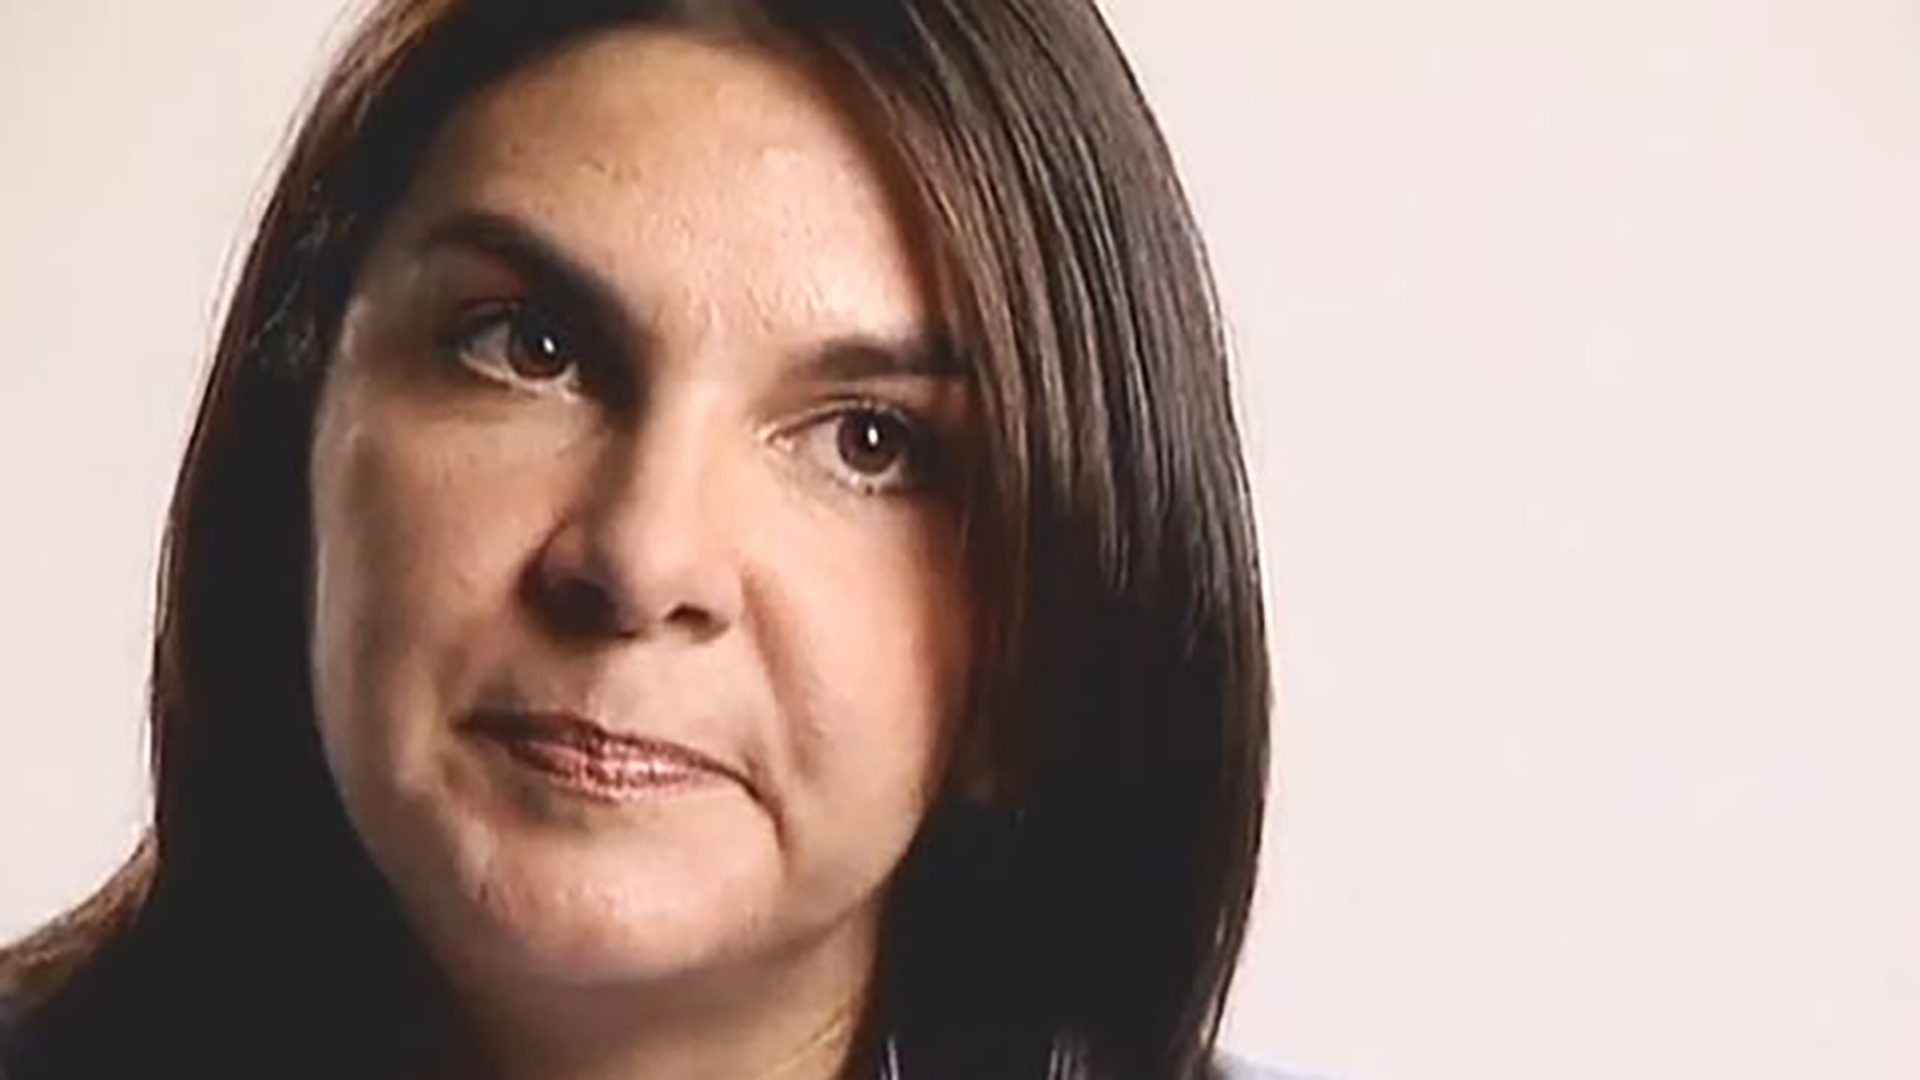 A woman with dark hair is interviewed against a light background.